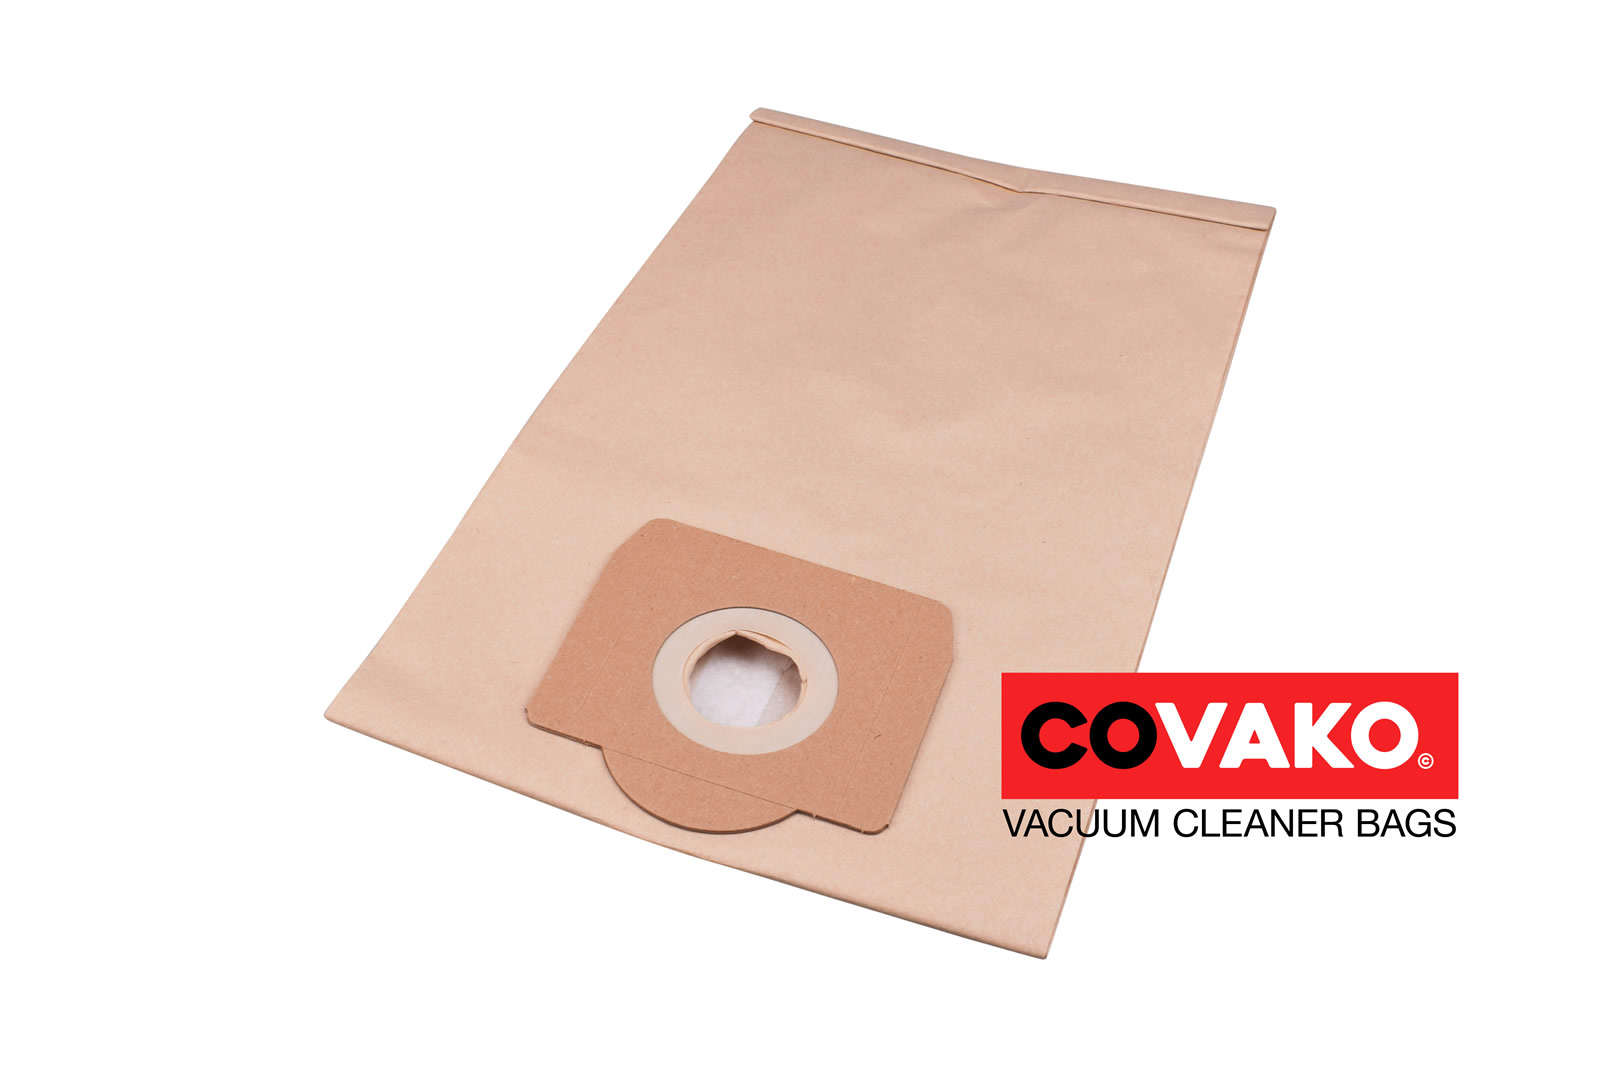 Cleancraft dryCat 133 IRSCM / Paper - Cleancraft vacuum cleaner bags